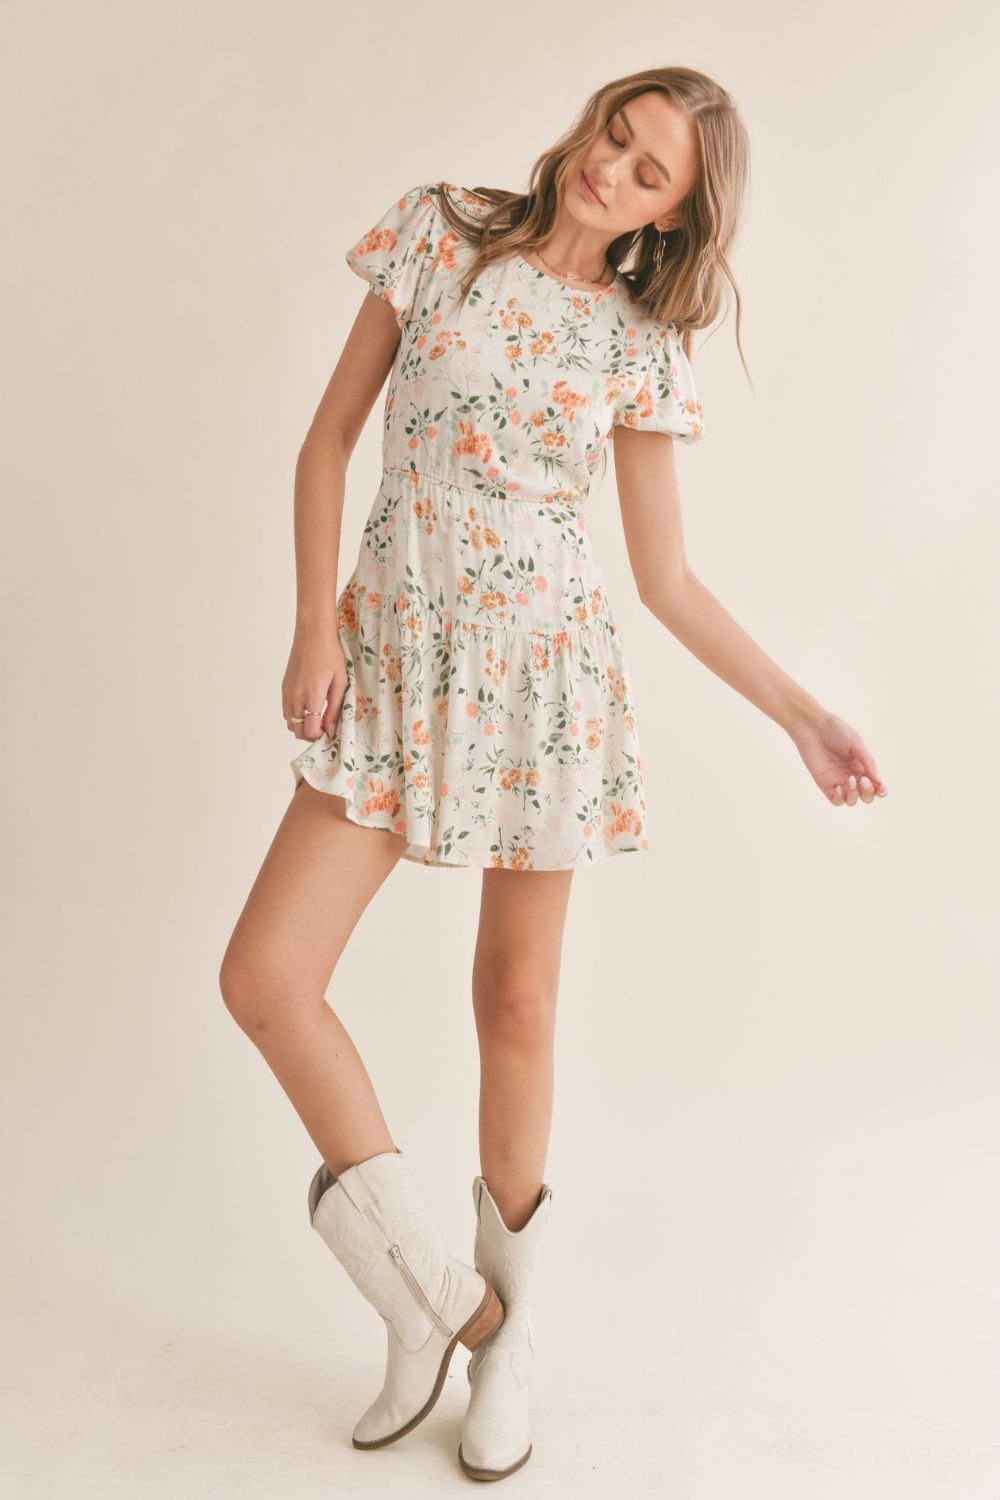 Women's French Country Bloom Cut Out Floral Mini Dress | IvoryMulti - Women's Dresses - Blooming Daily